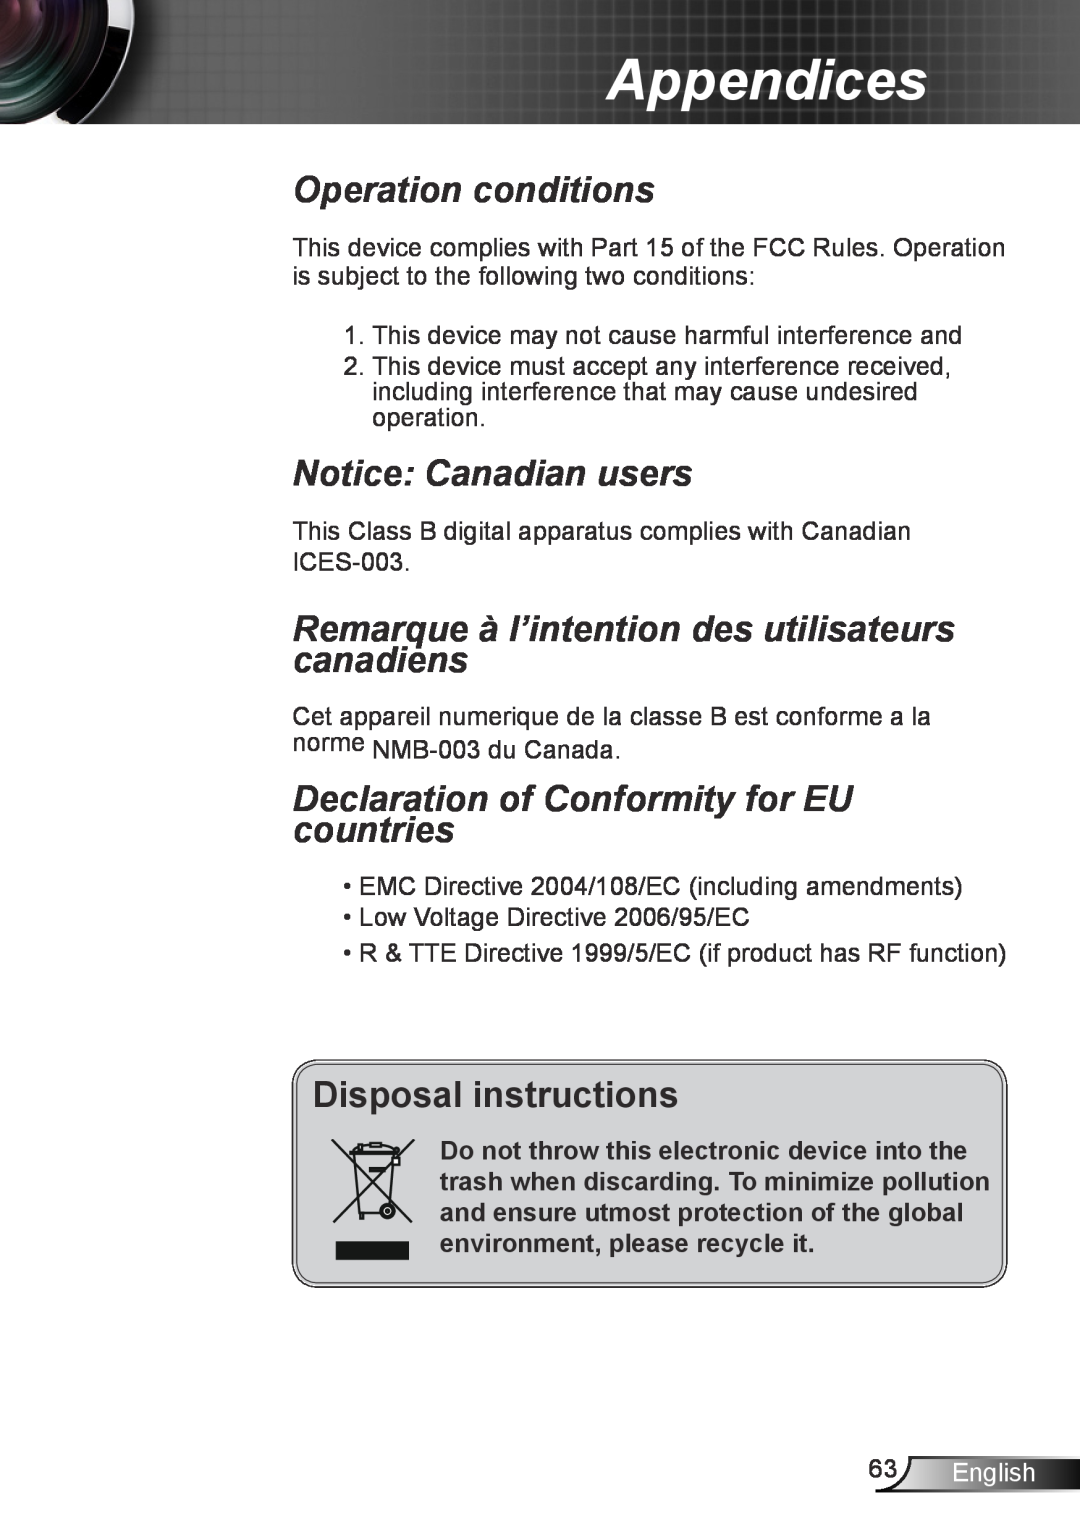 Optoma Technology DS339 Operation conditions, Notice Canadian users, Remarque à l’intention des utilisateurs canadiens 